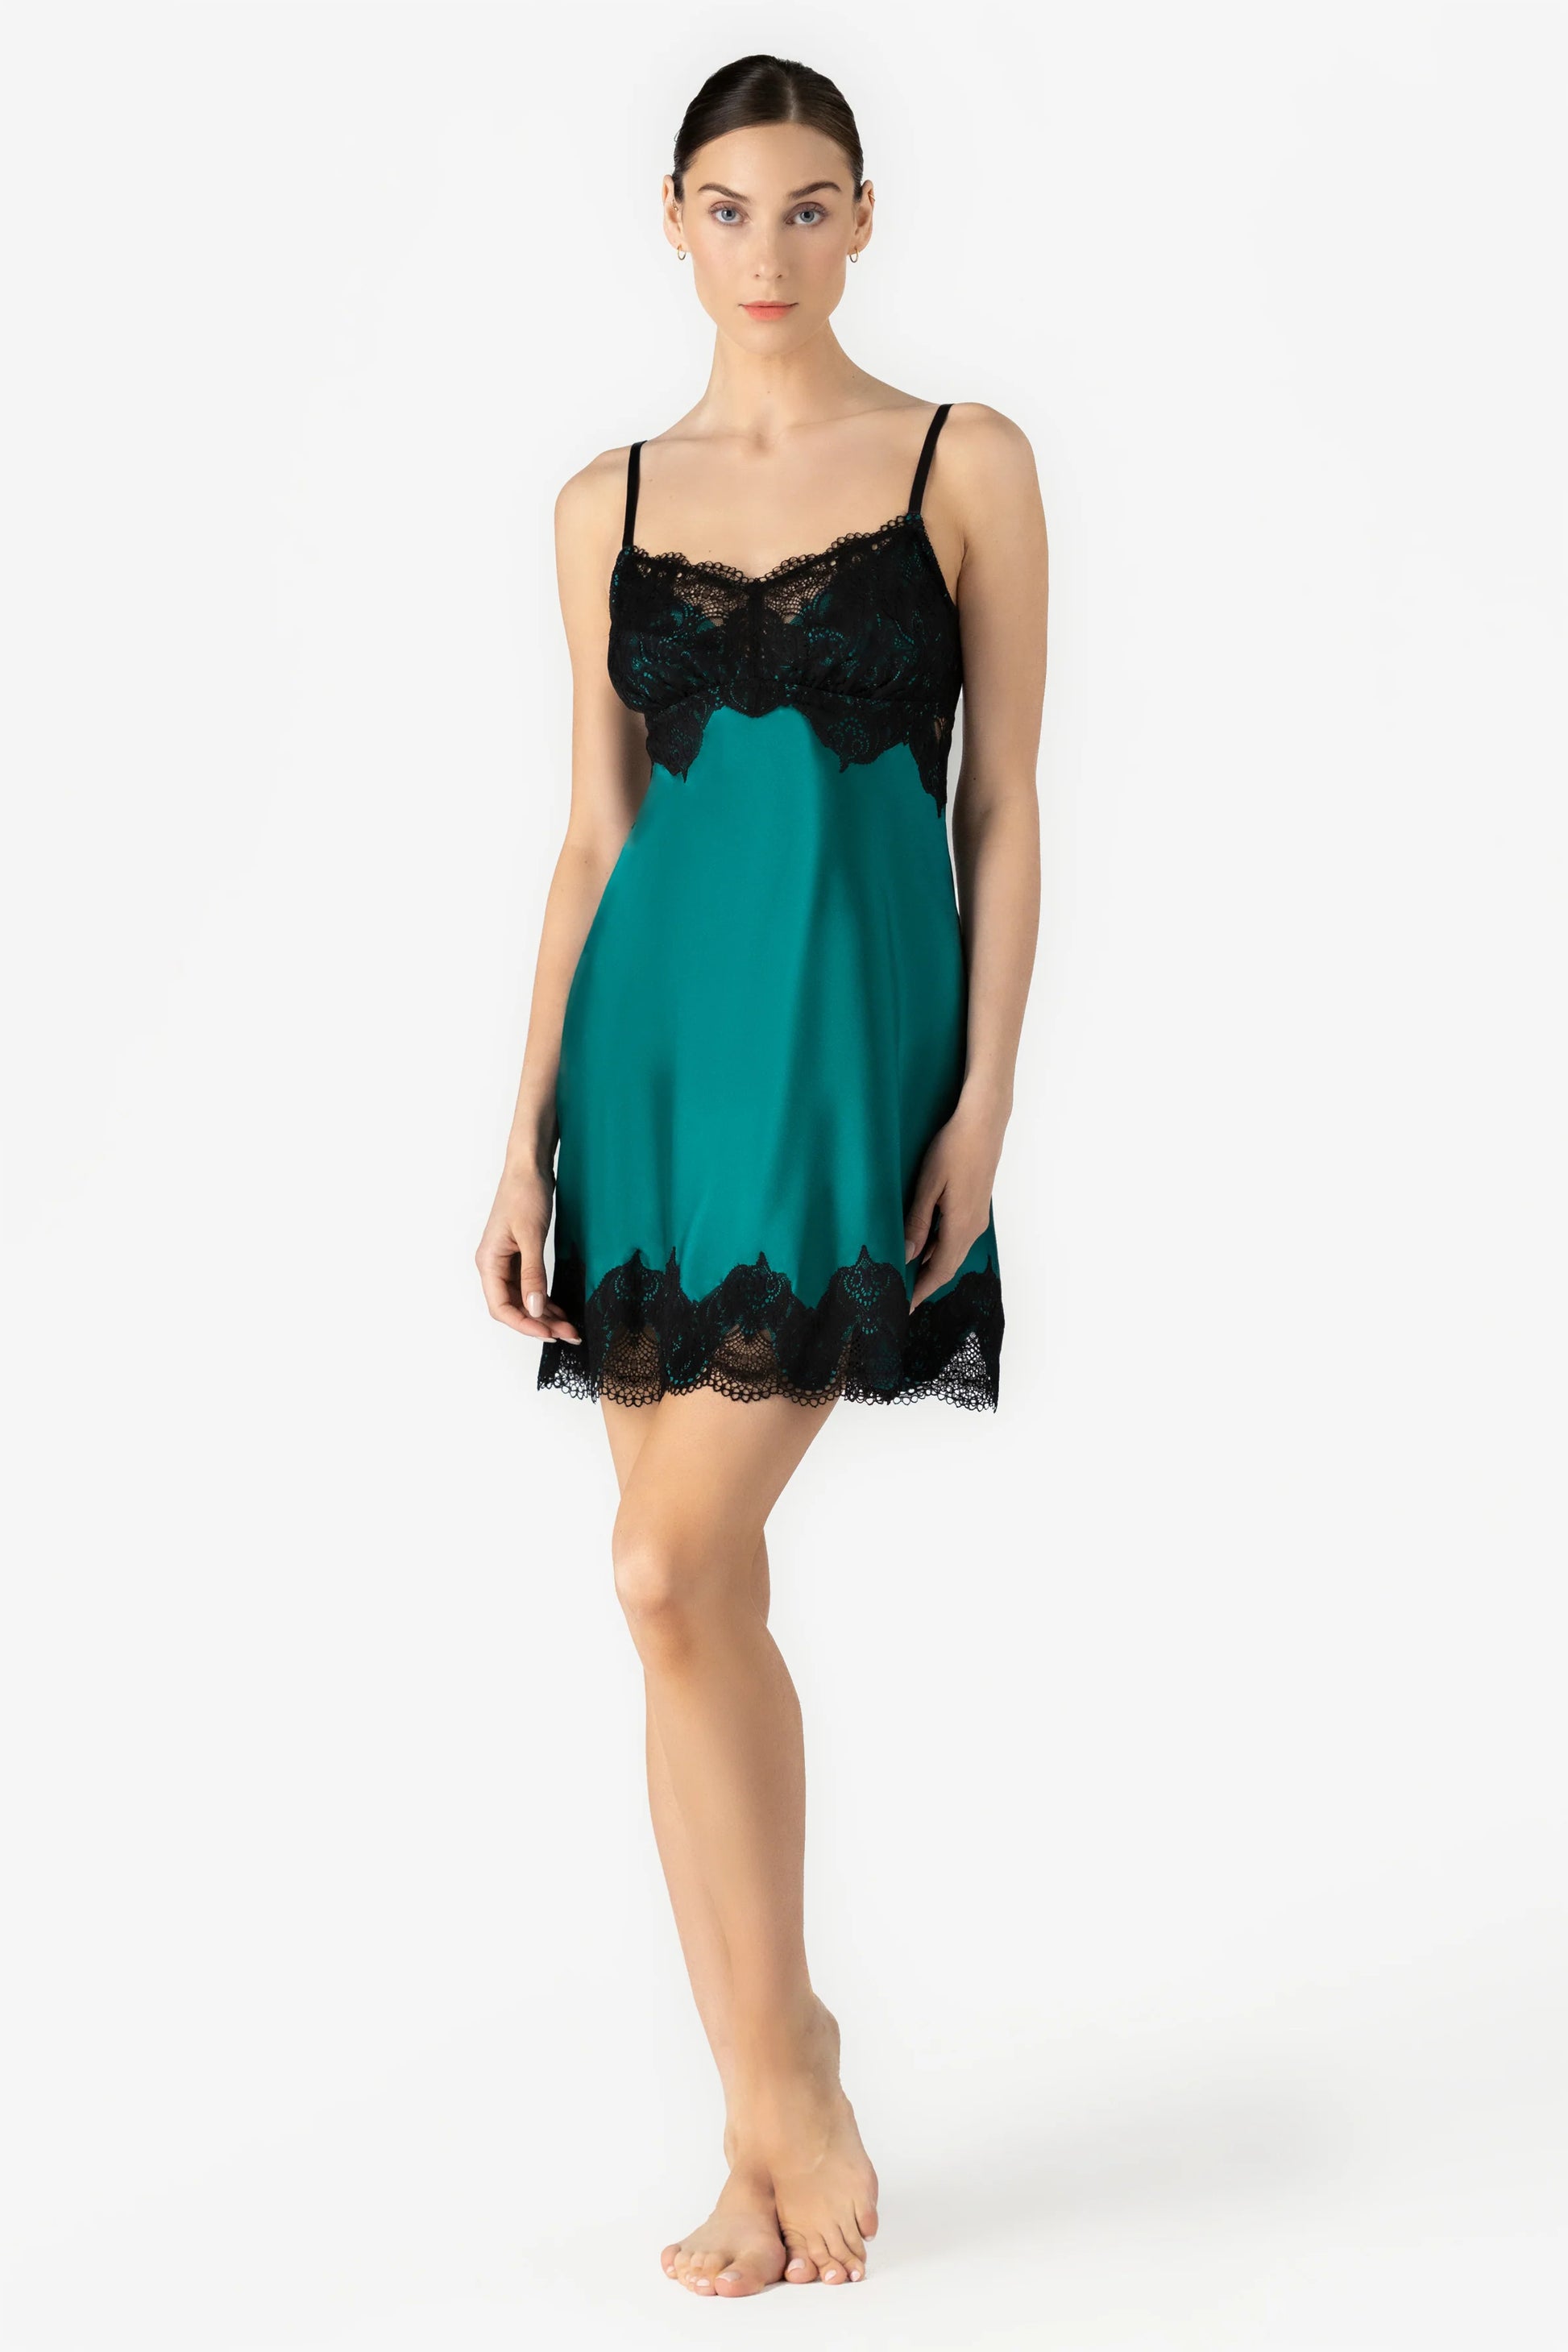 SABRINA MAGIC BUST SUPPORT SILK CHEMISE - Expect Lace